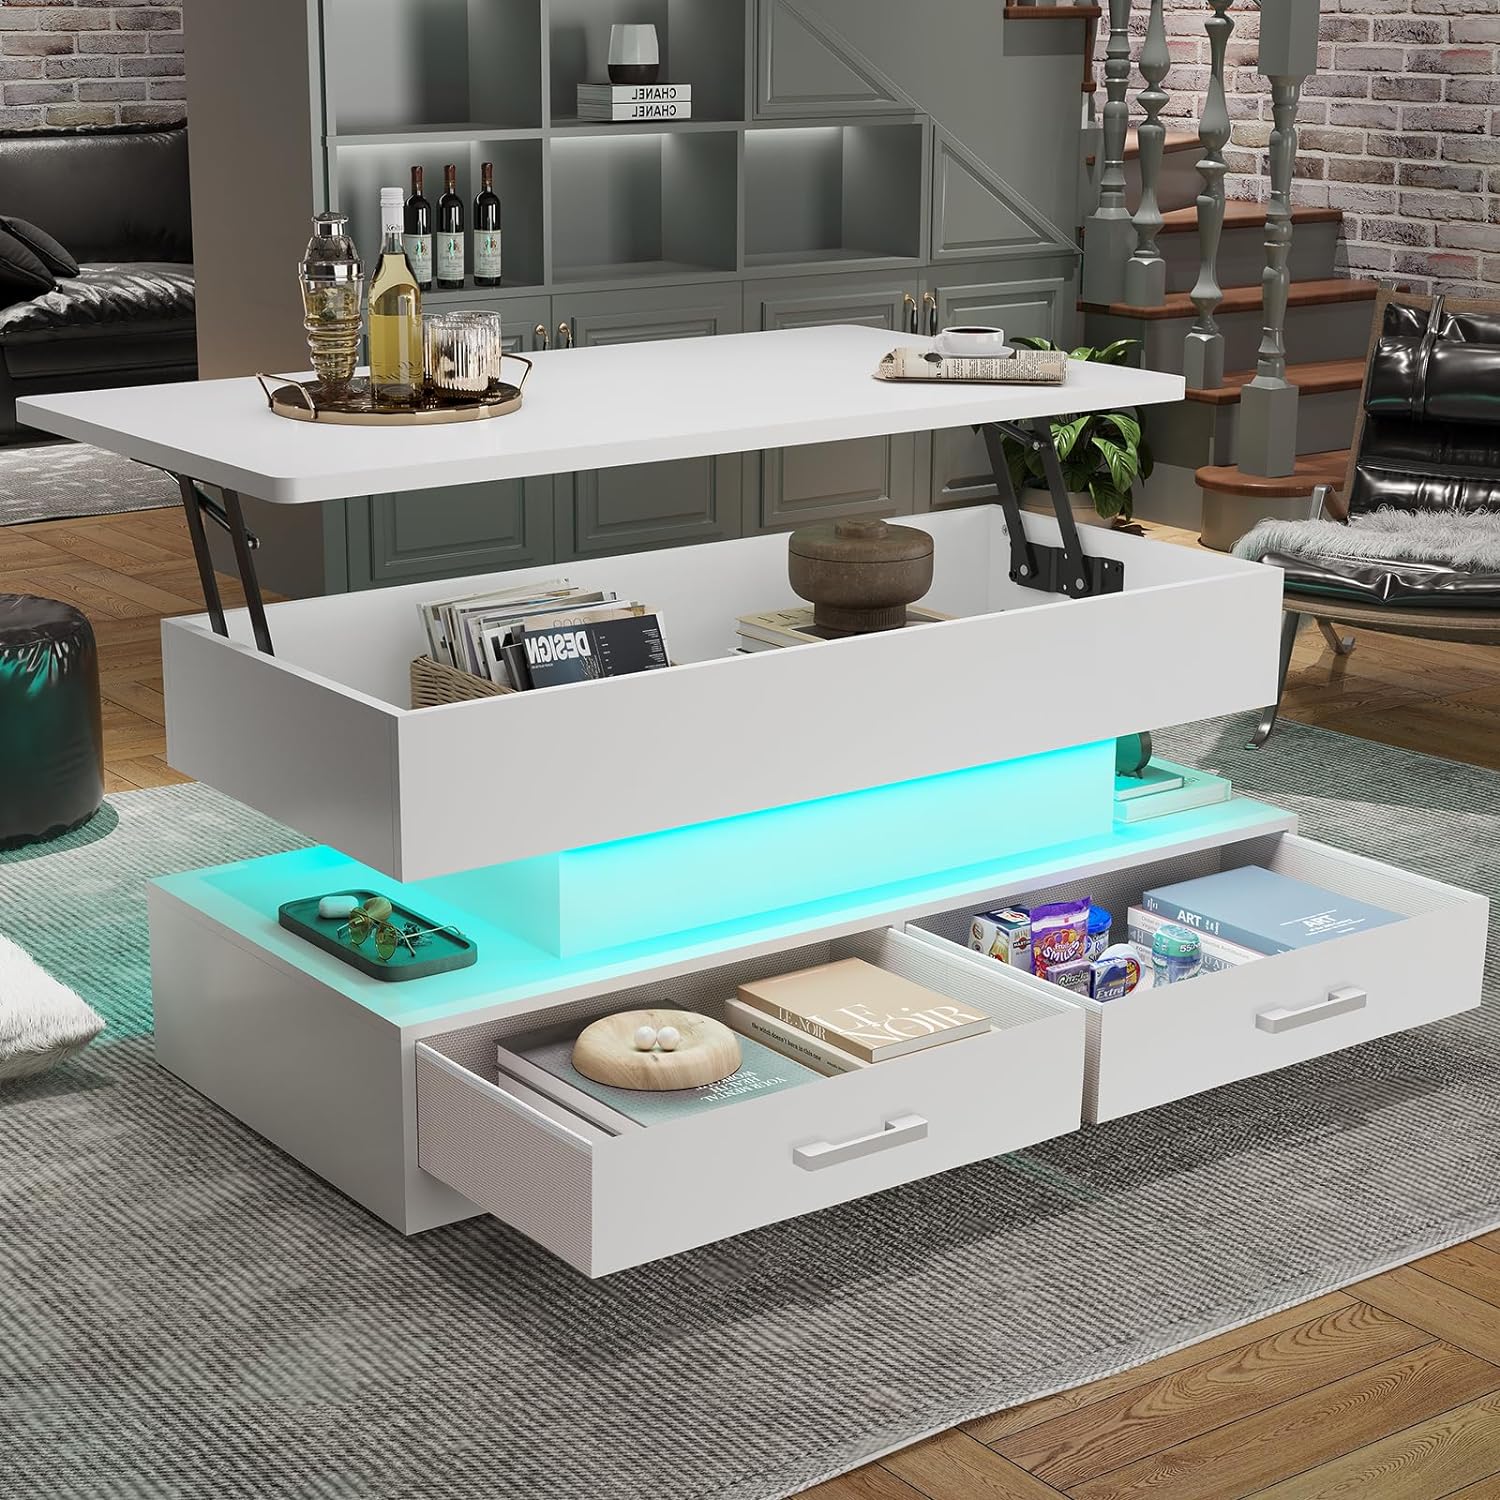 SEDETA 40 Lift Top Coffee Table, Coffee Tables with Storage for Living Room, Small Coffee Table with 2 Fabric Drawers & LED Light for Dining Reception Room, White